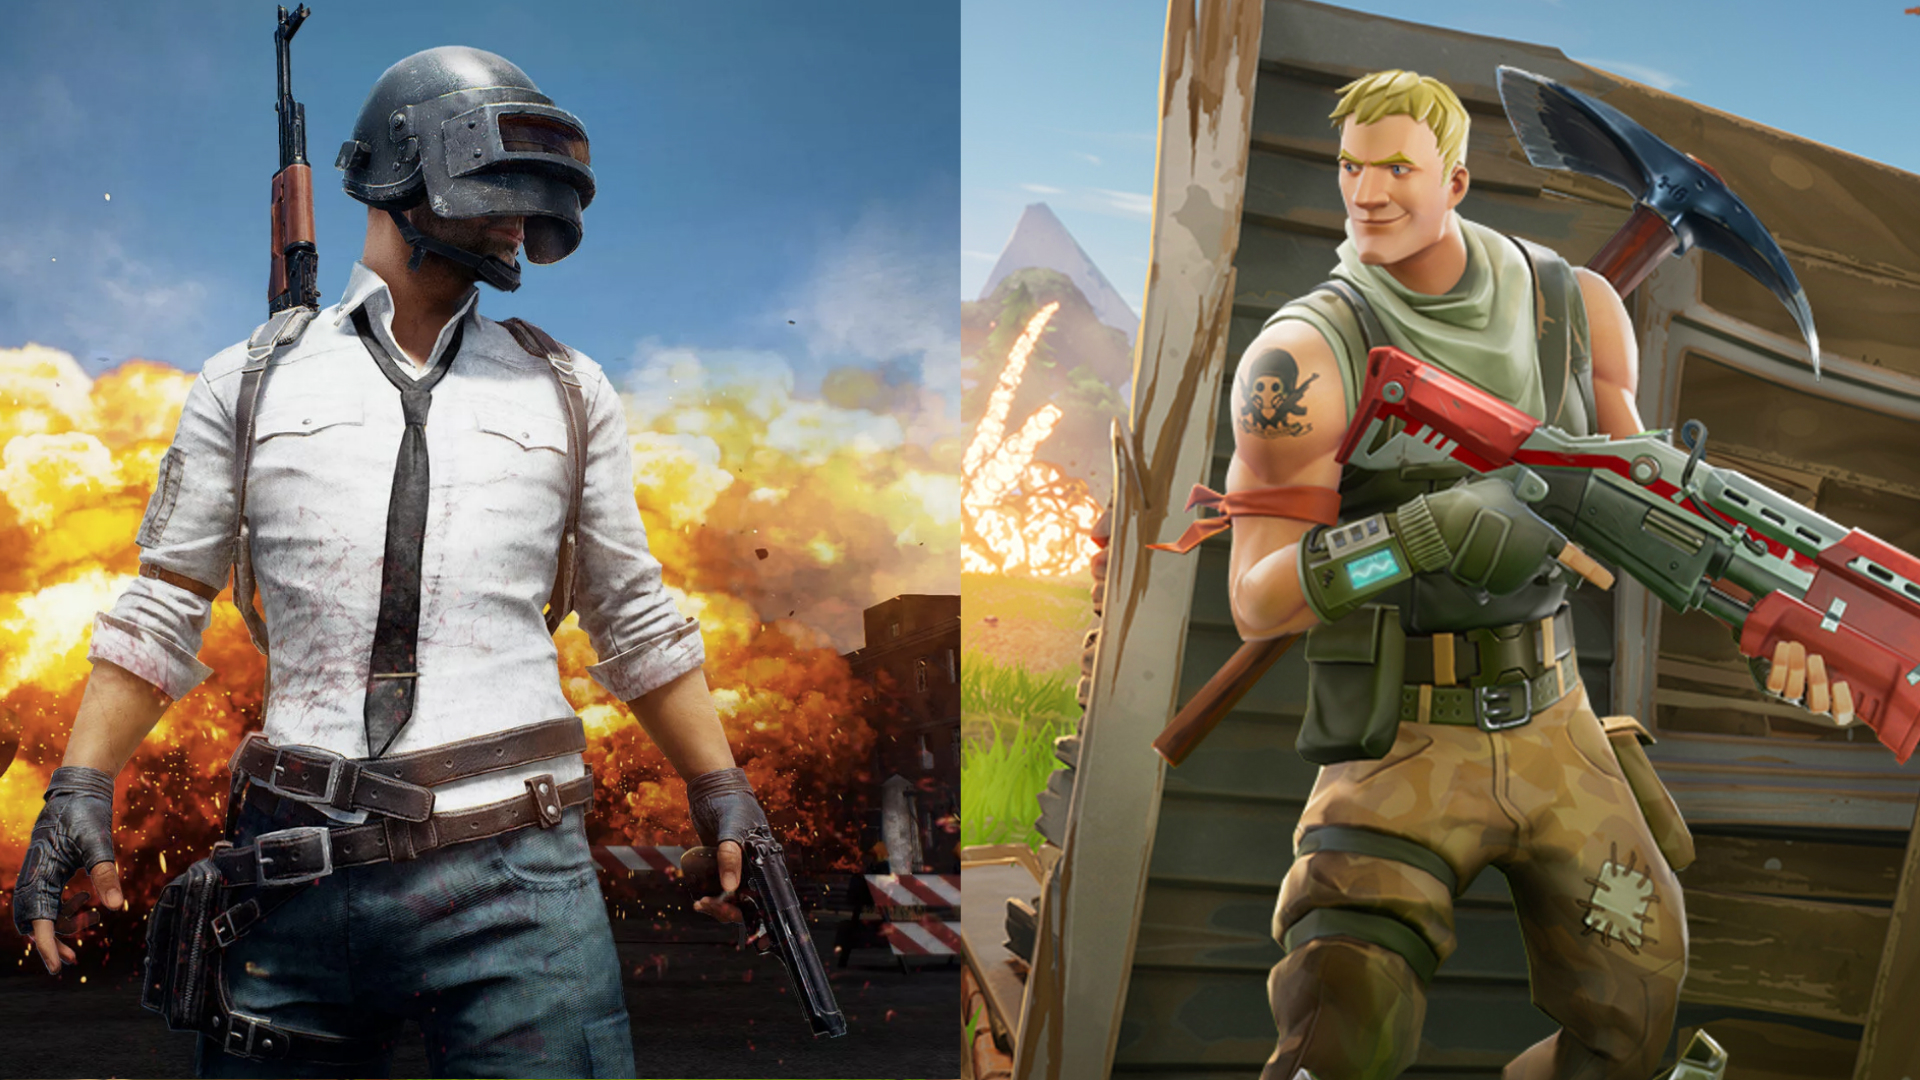 Fortnite Vs Pubg The Ten Biggest Differences Between The Mobile